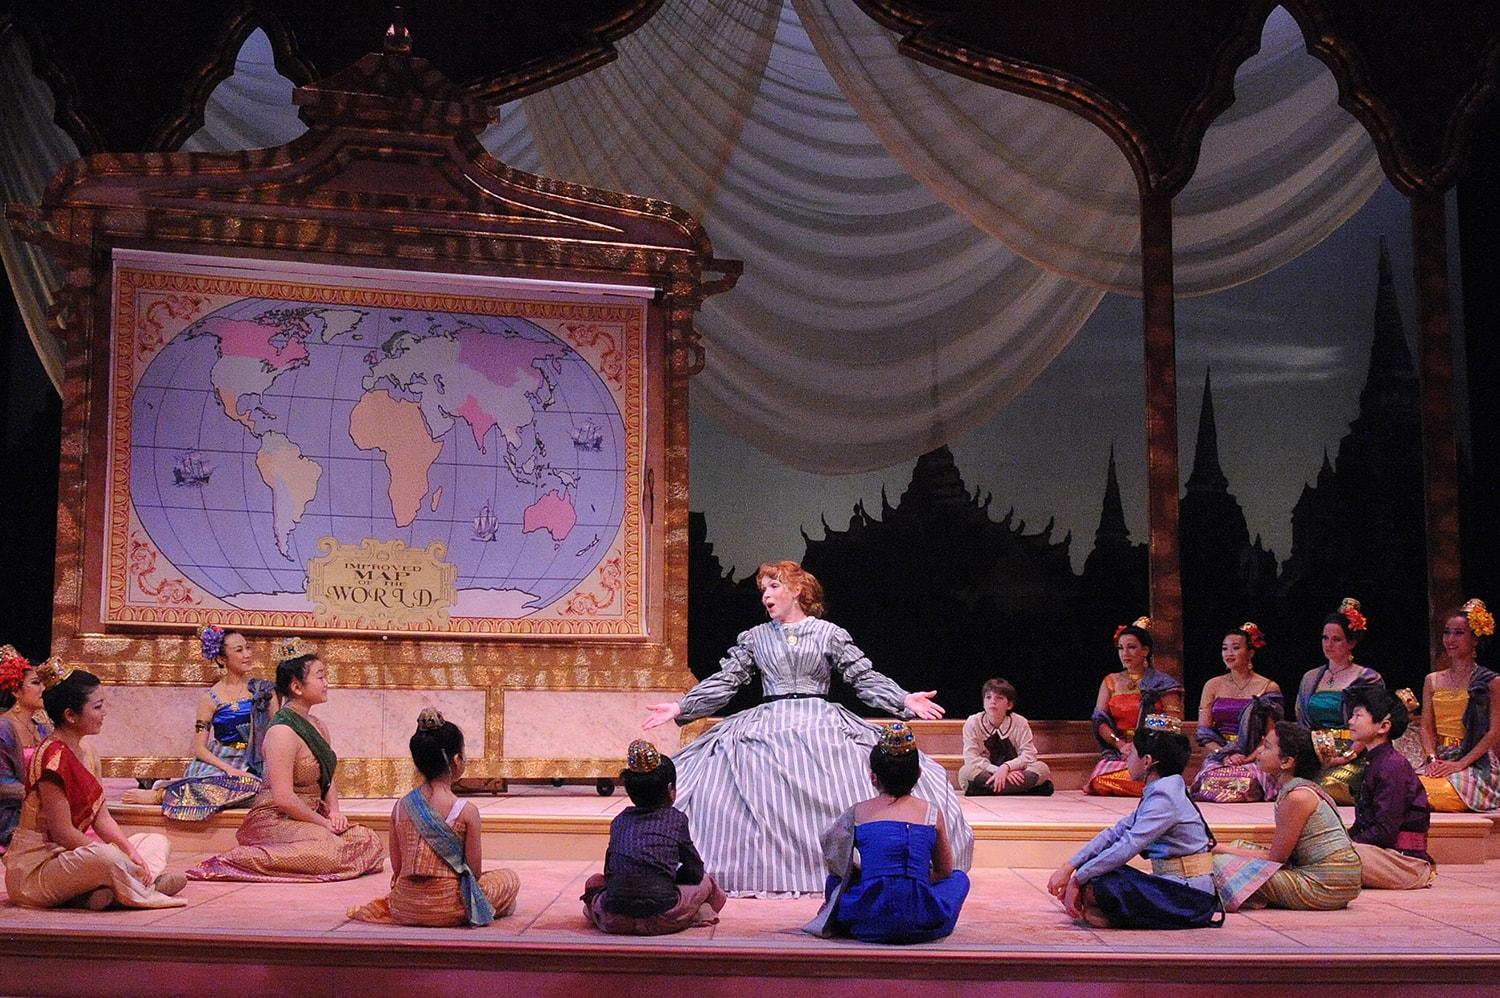 Children and theater. Театр дети тишины. The King and i Musical. Спектакль PNG. Children's Theater Branding.